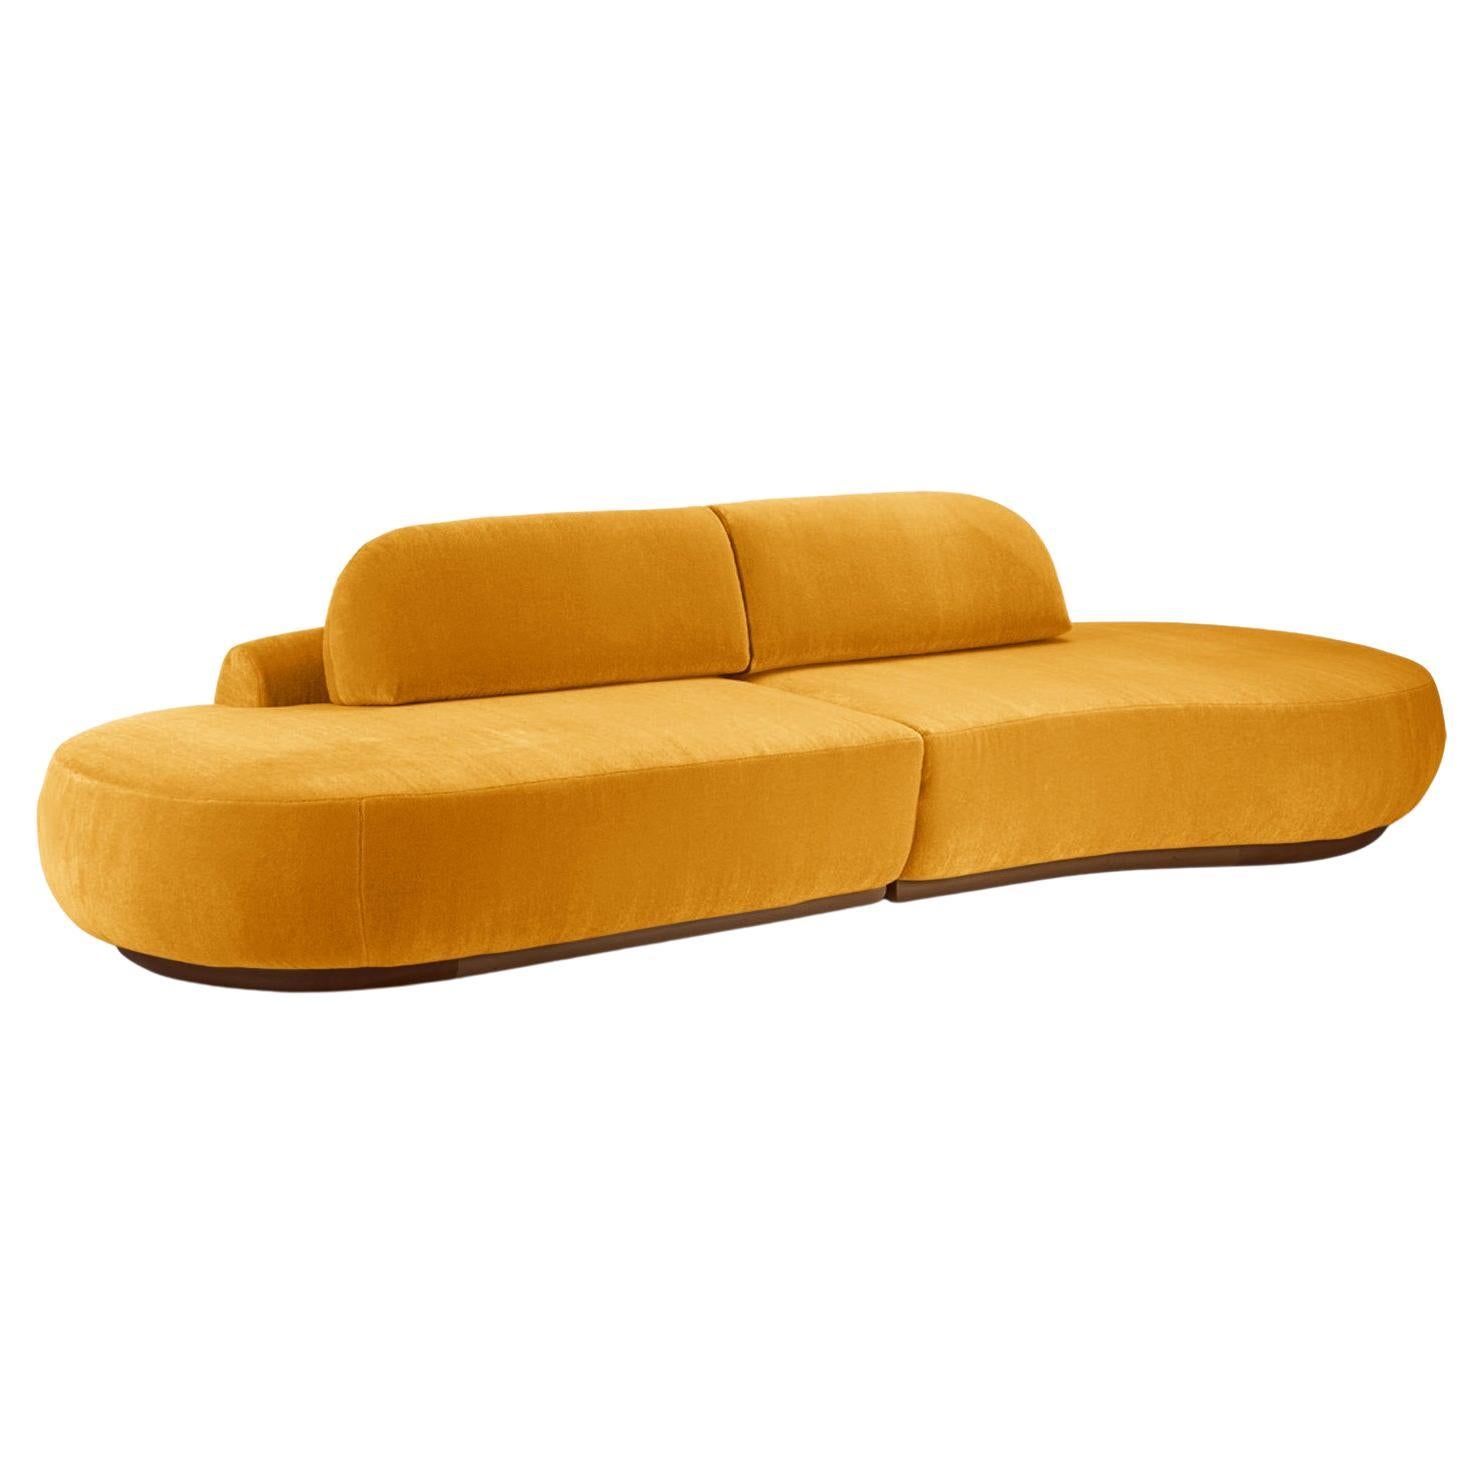 Naked Curved Sectional Sofa, 2 Piece with Beech Ash-056-1 and Corn